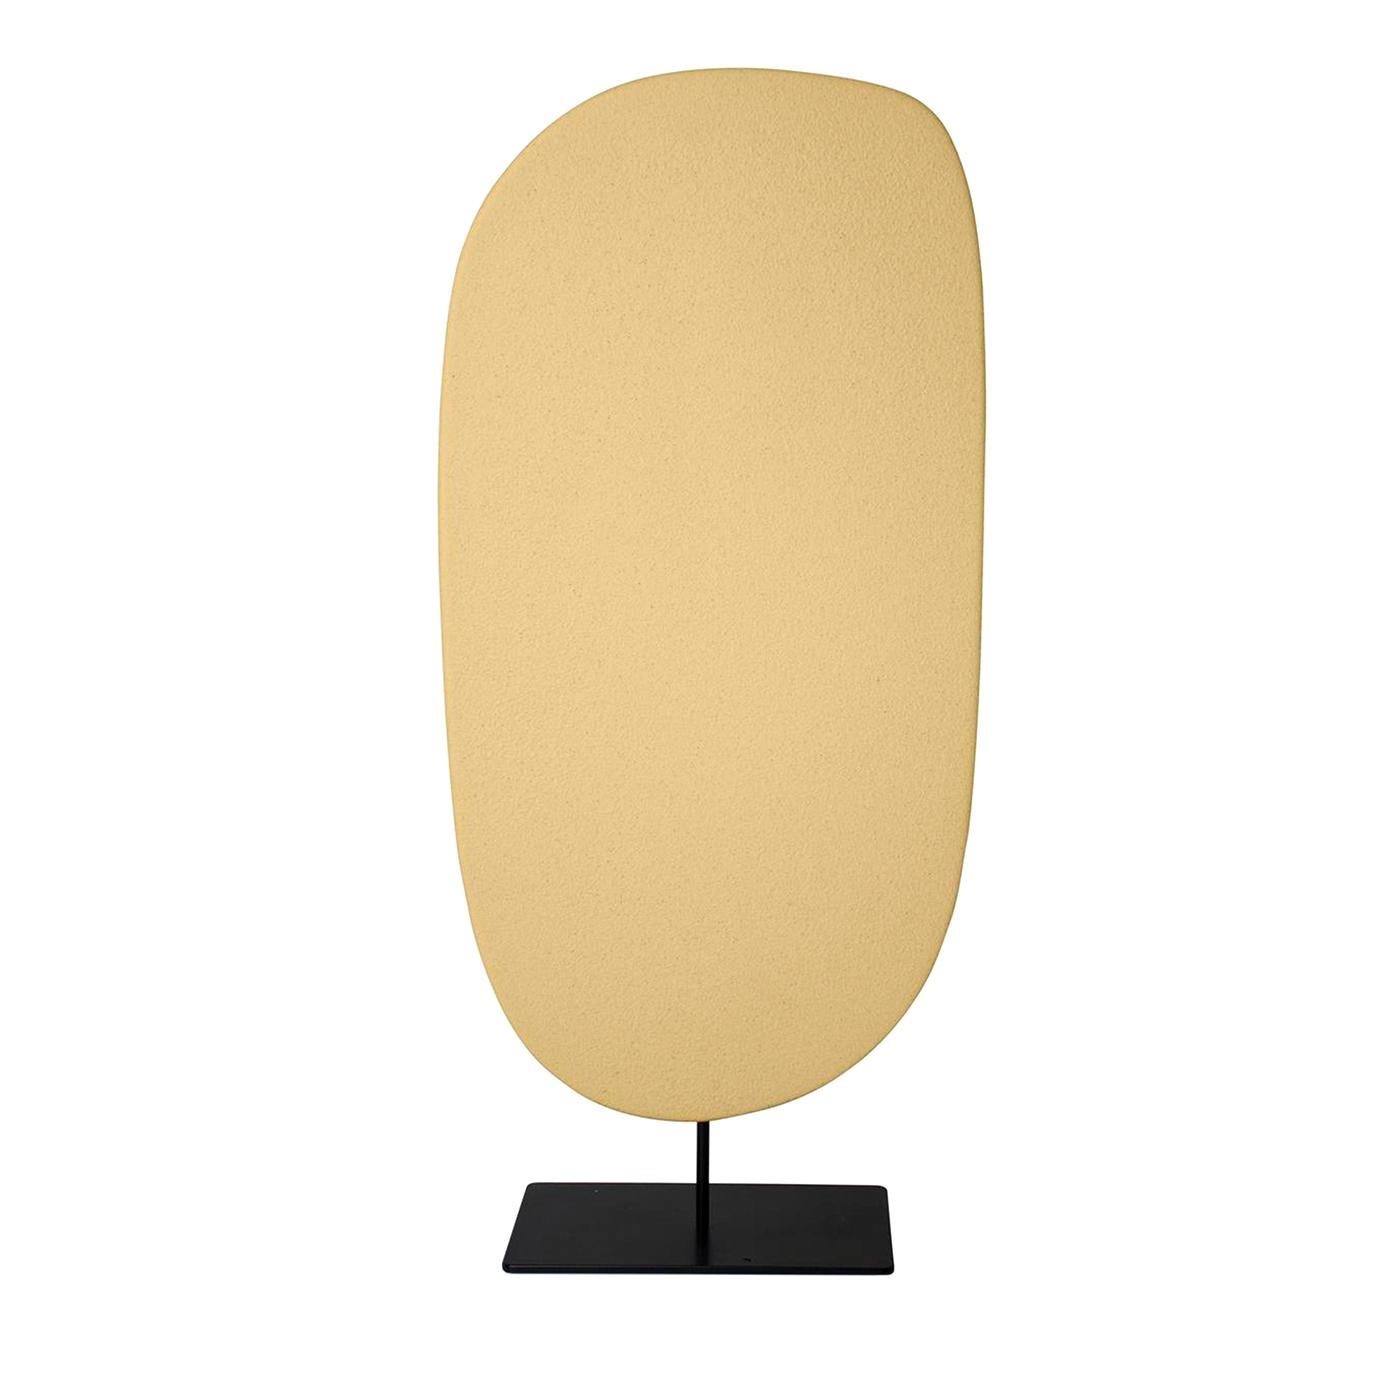 Contemporary Hello Matisse Oval Totem For Sale